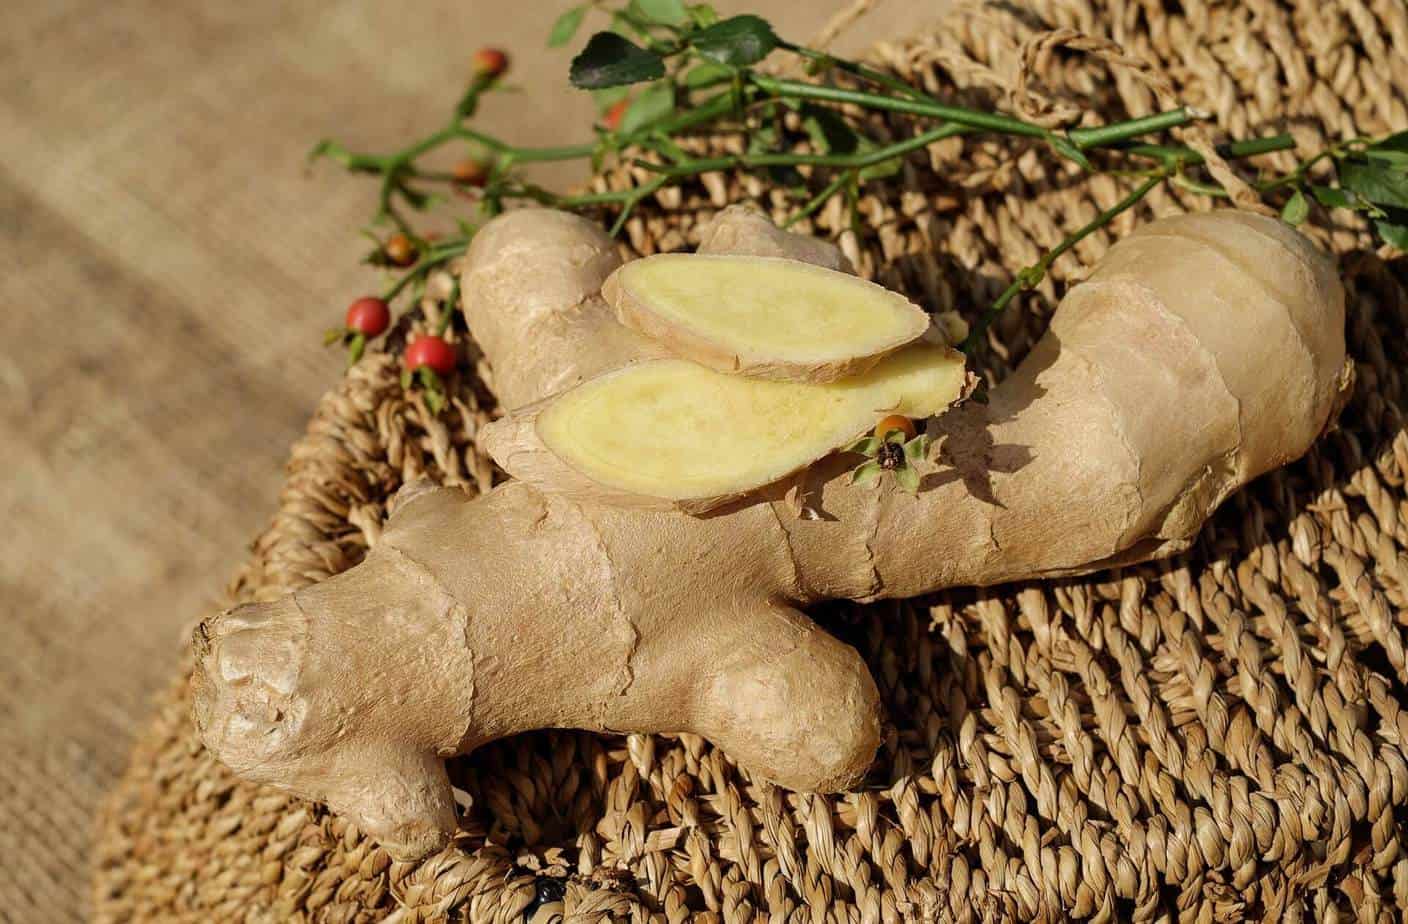 ginger helps in weight loss